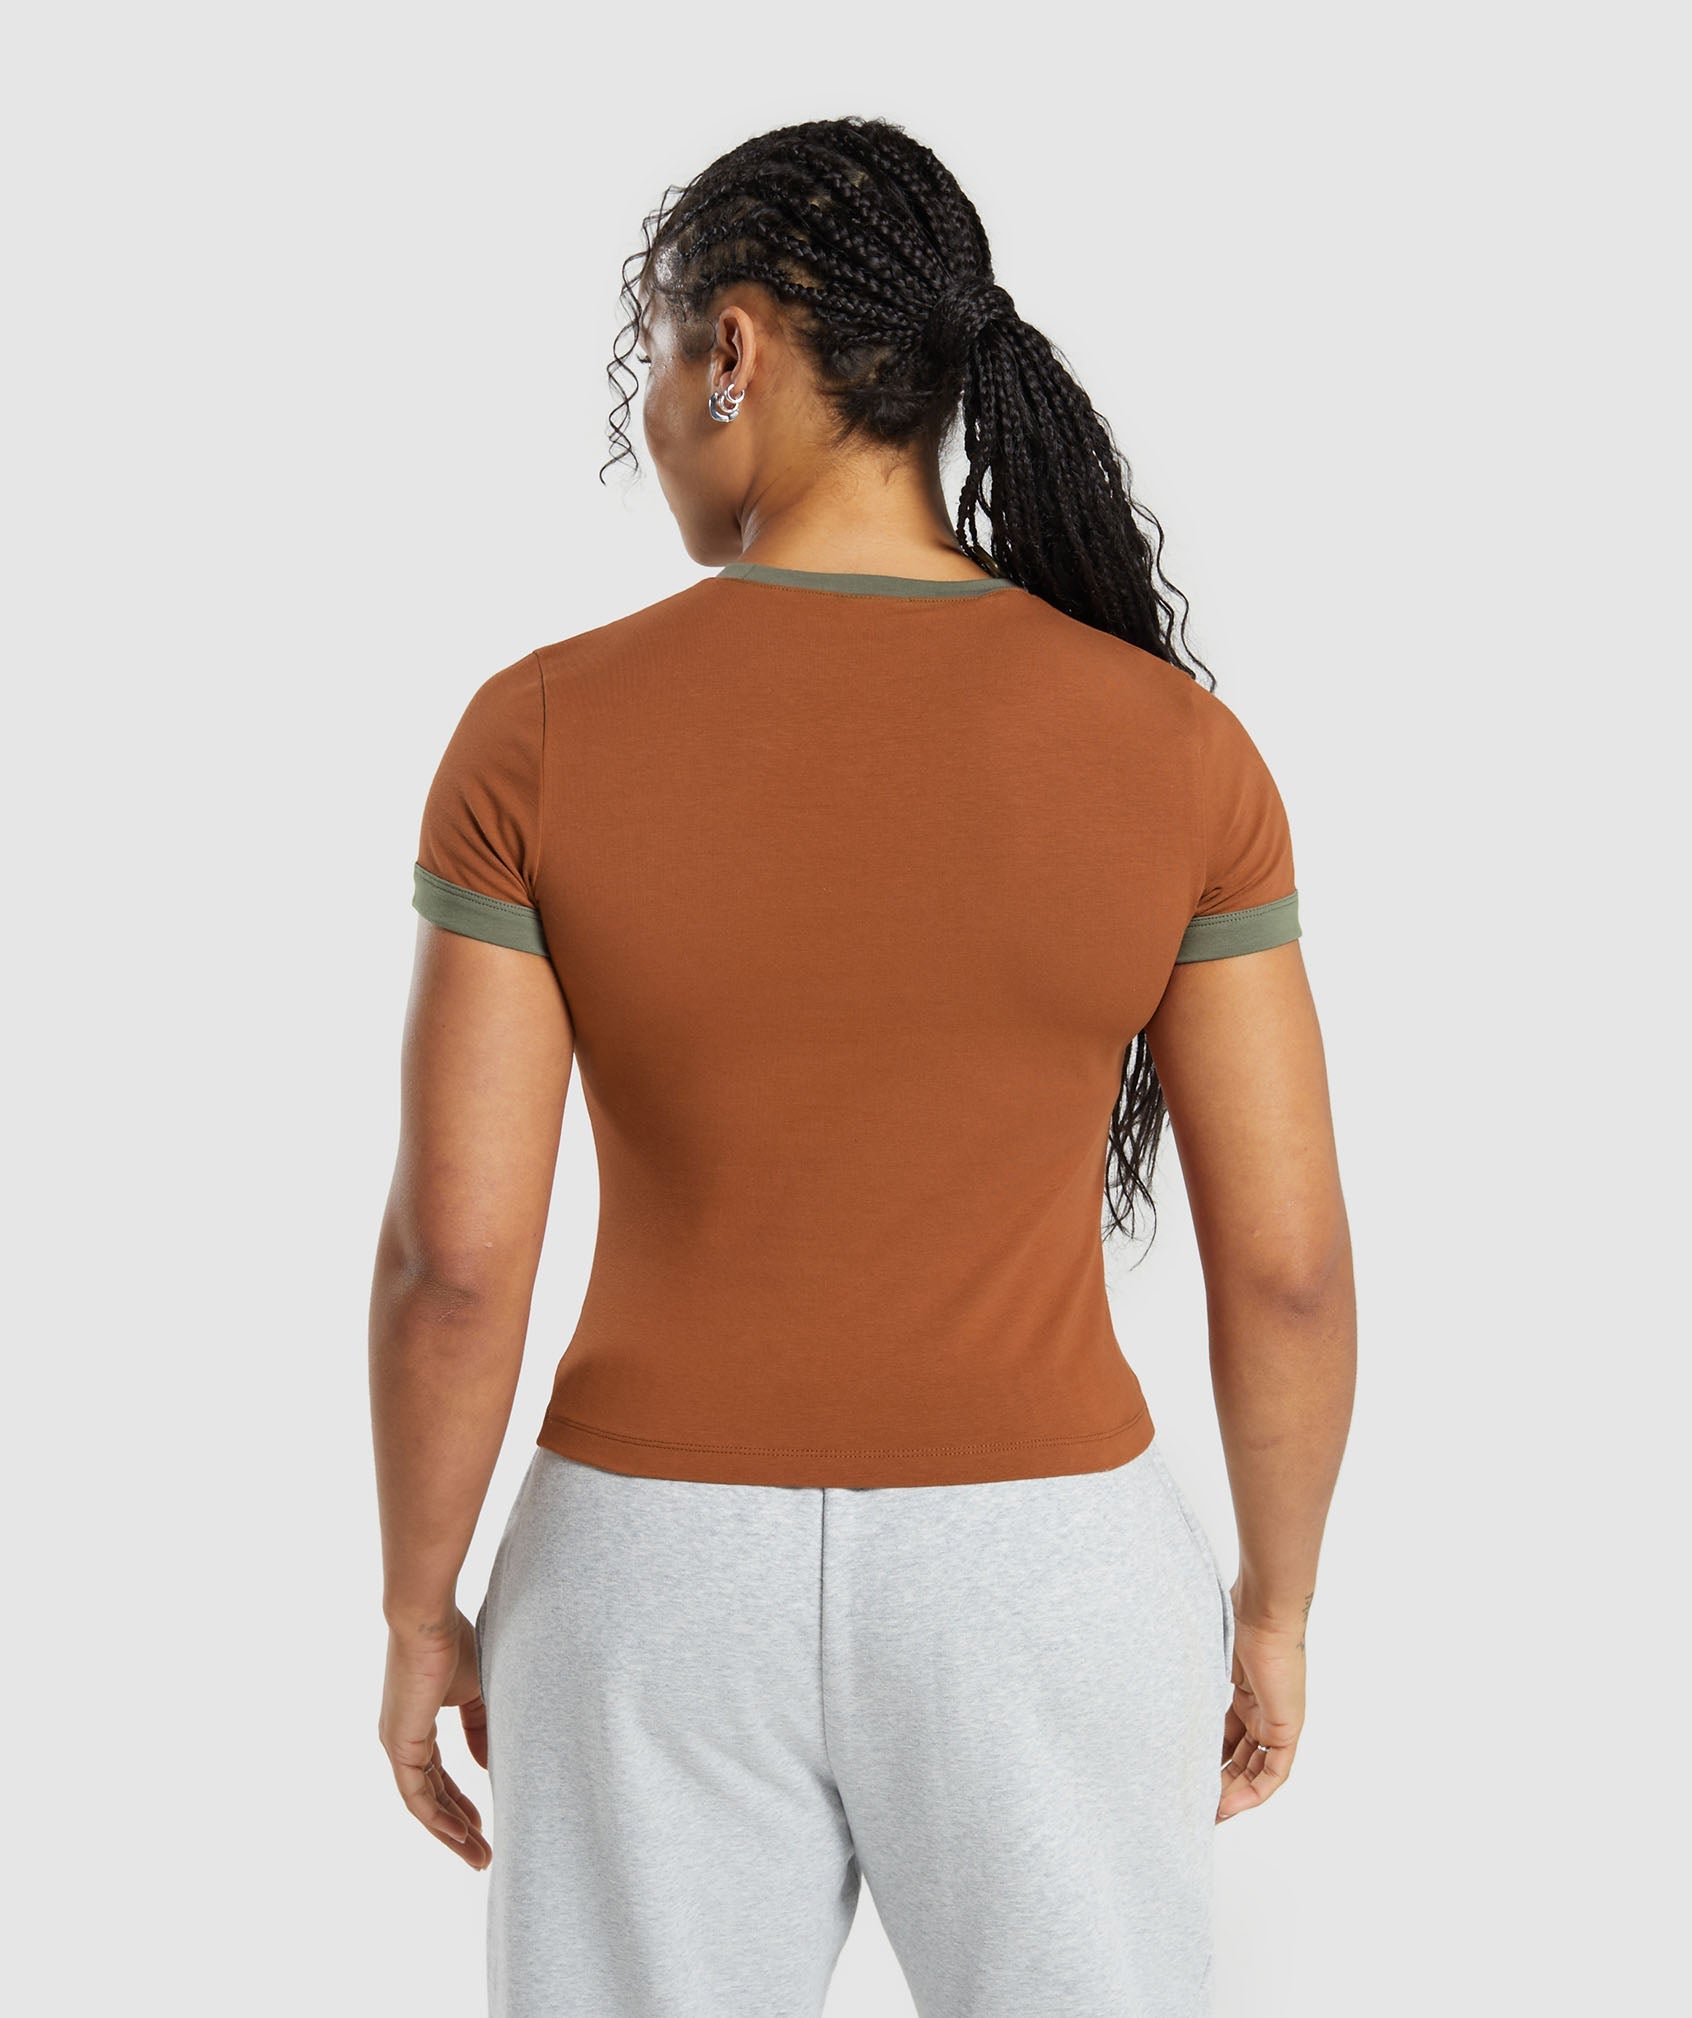 Gymshark Lifting Baby T-Shirt - Copper Brown/Camo Brown